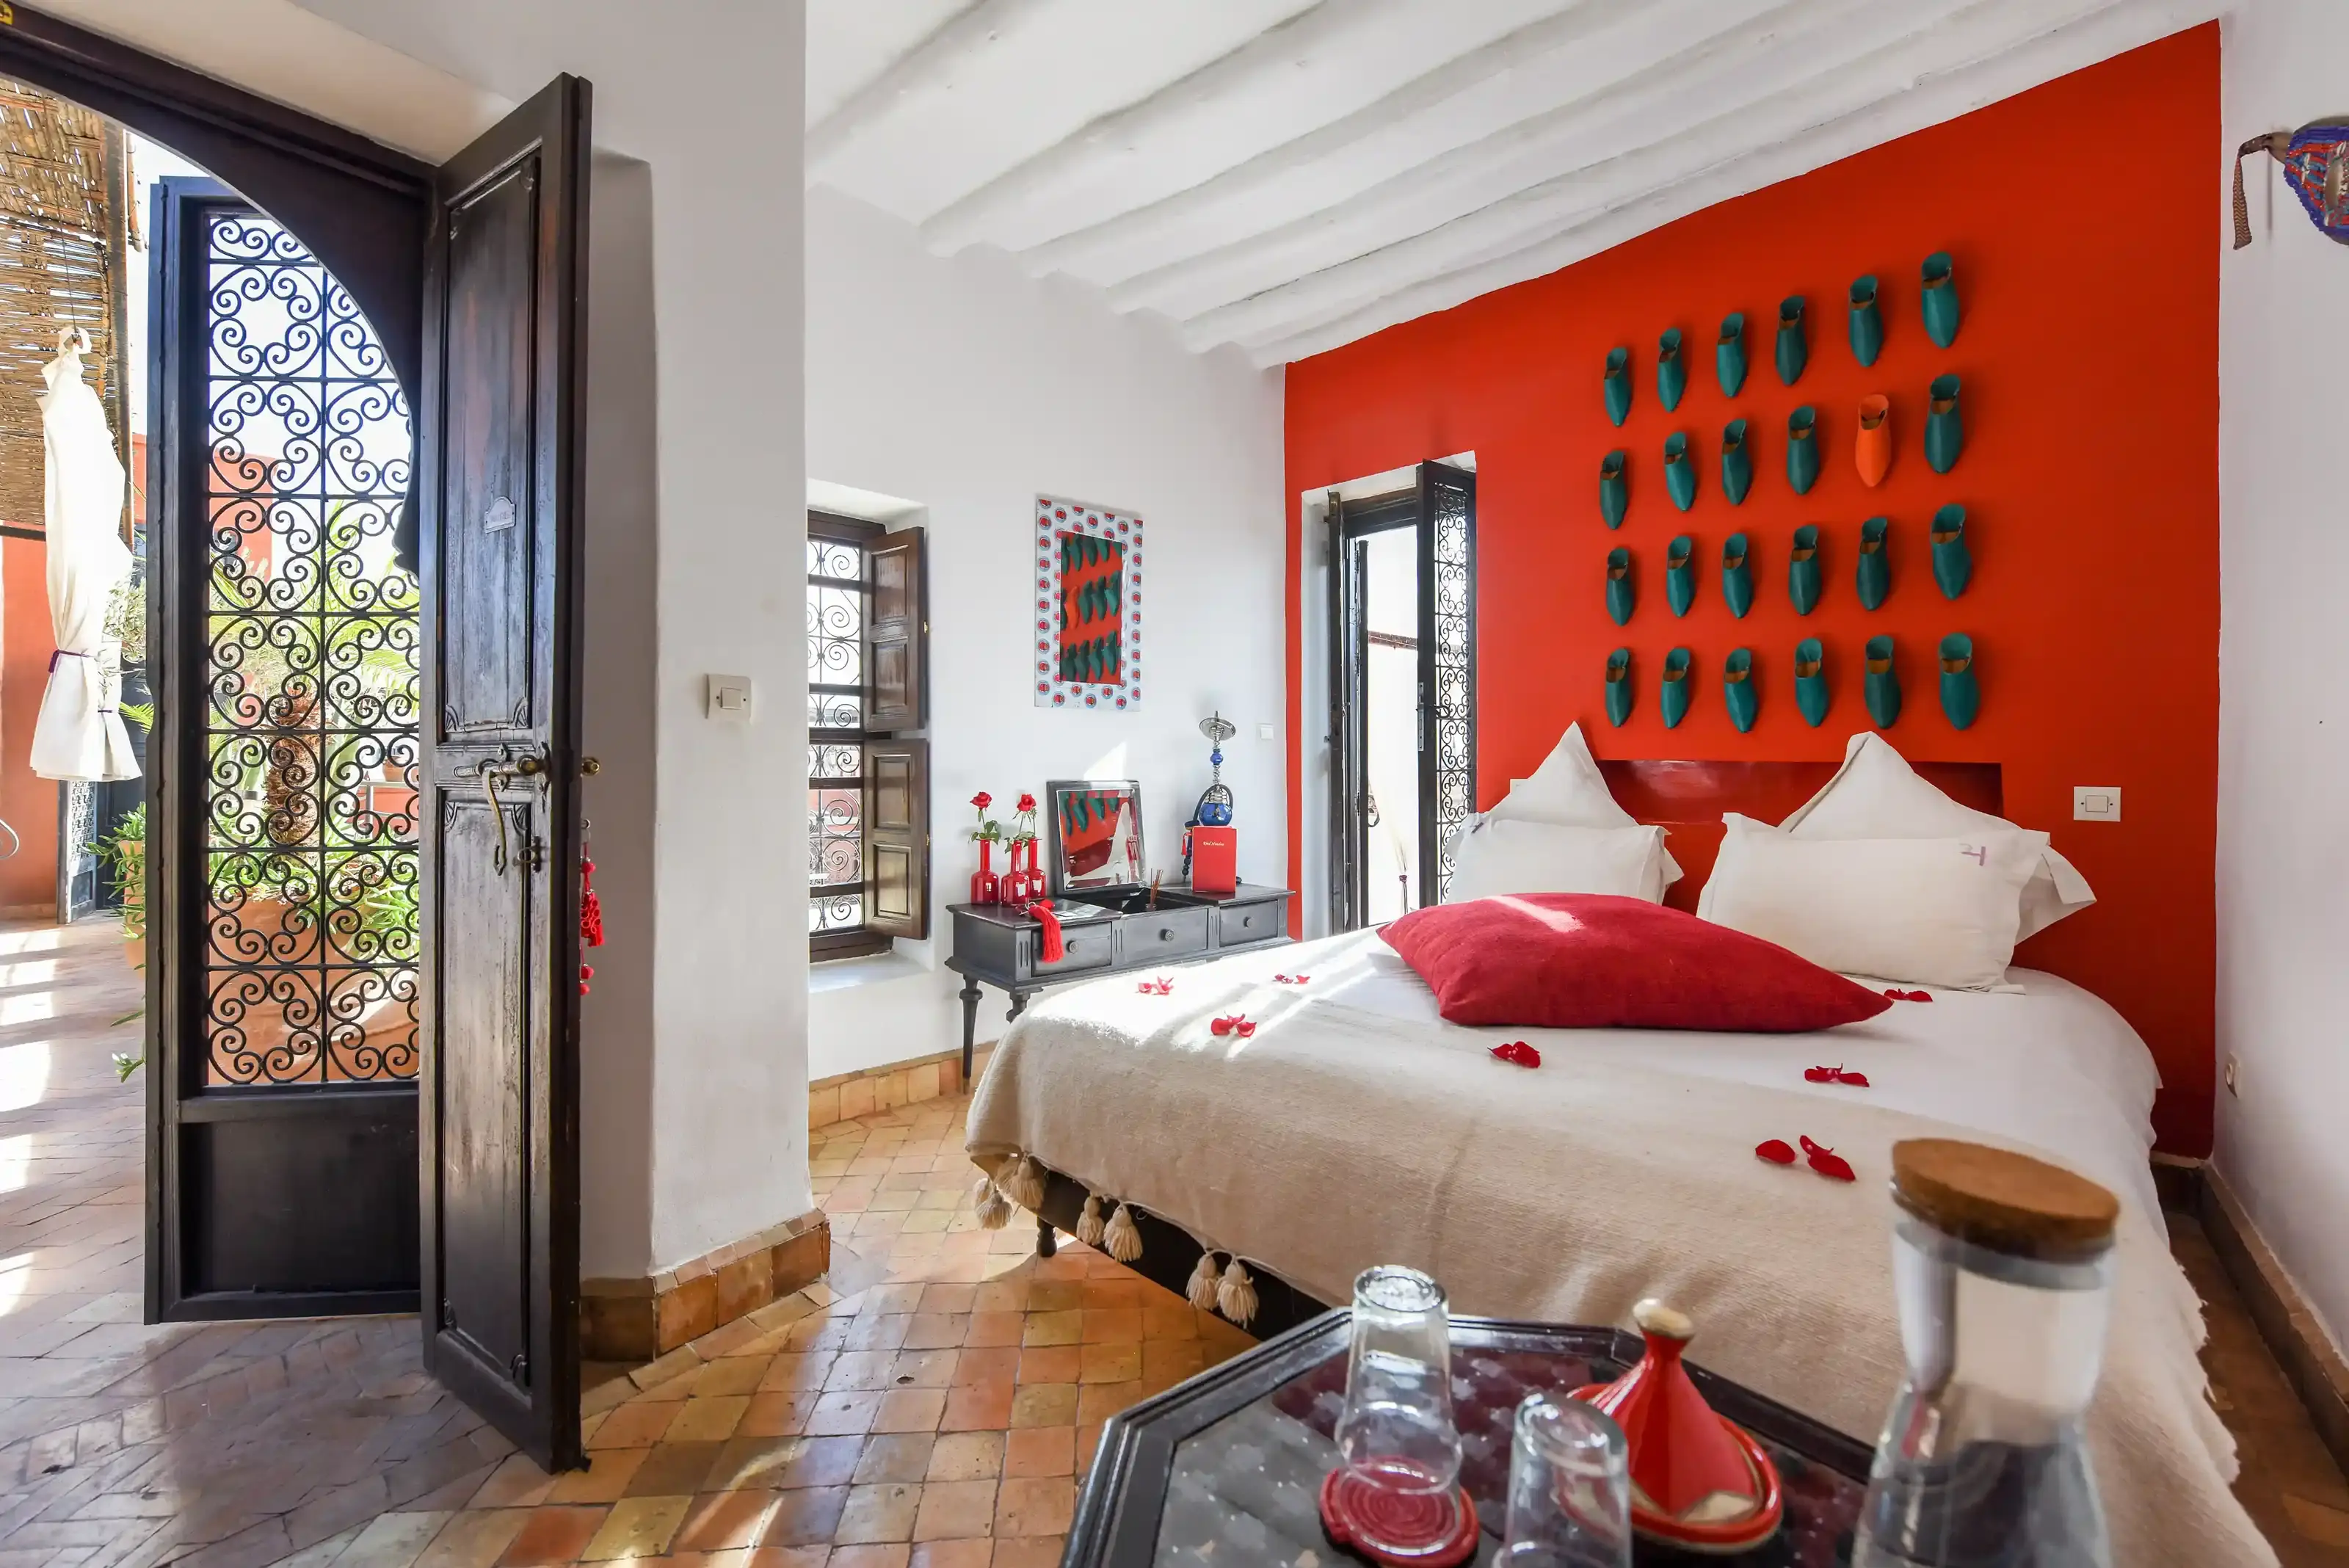 The Junior Suite of our guesthouse is equipped with a queen-size double bed and a private terrace